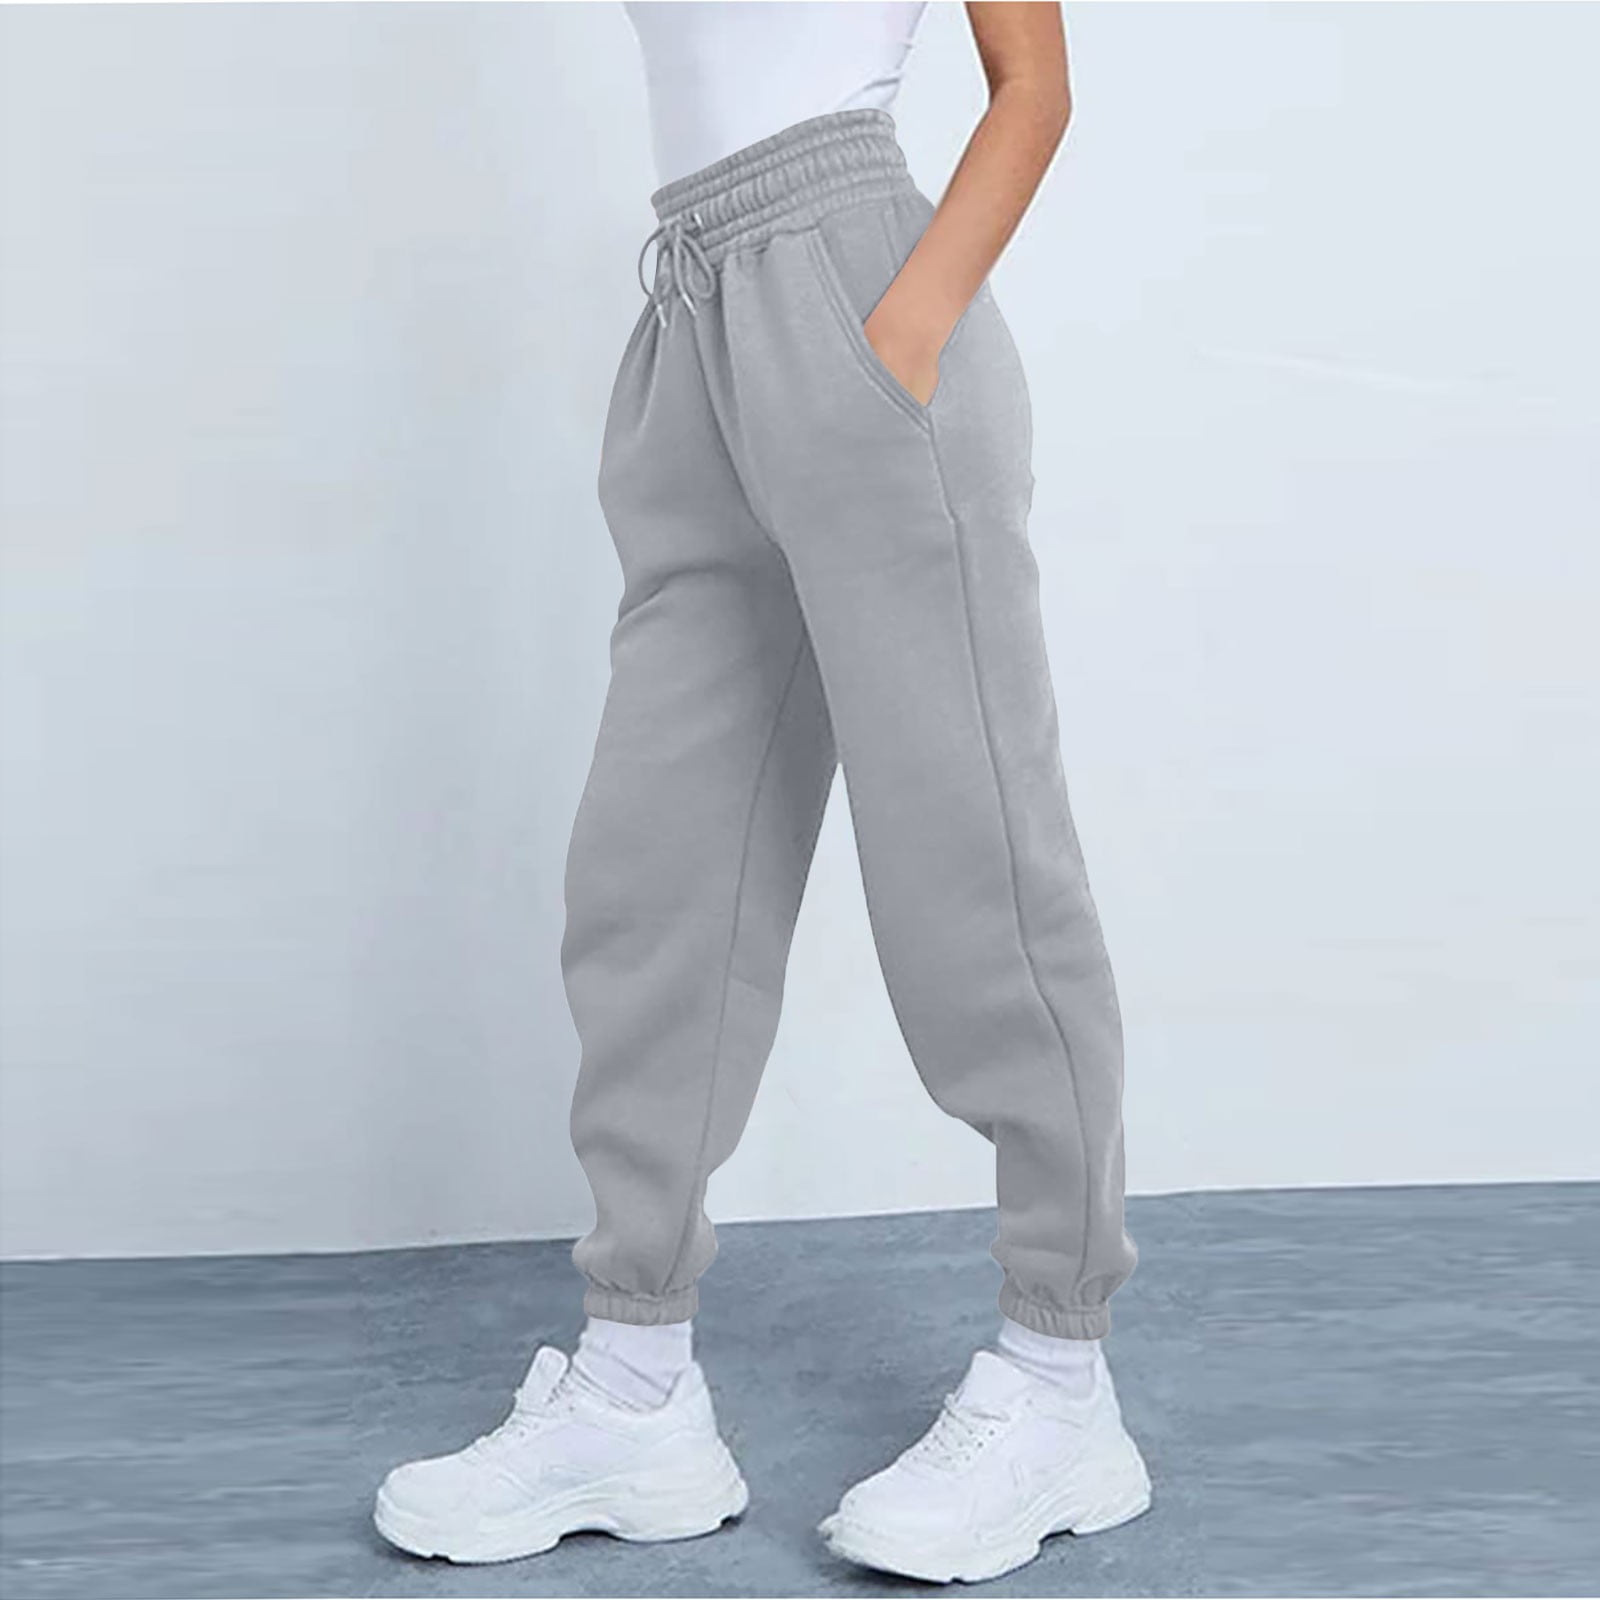 Cinch Bottom Sweatpants Women Aesthetic Clothes Joggers For, 41% OFF